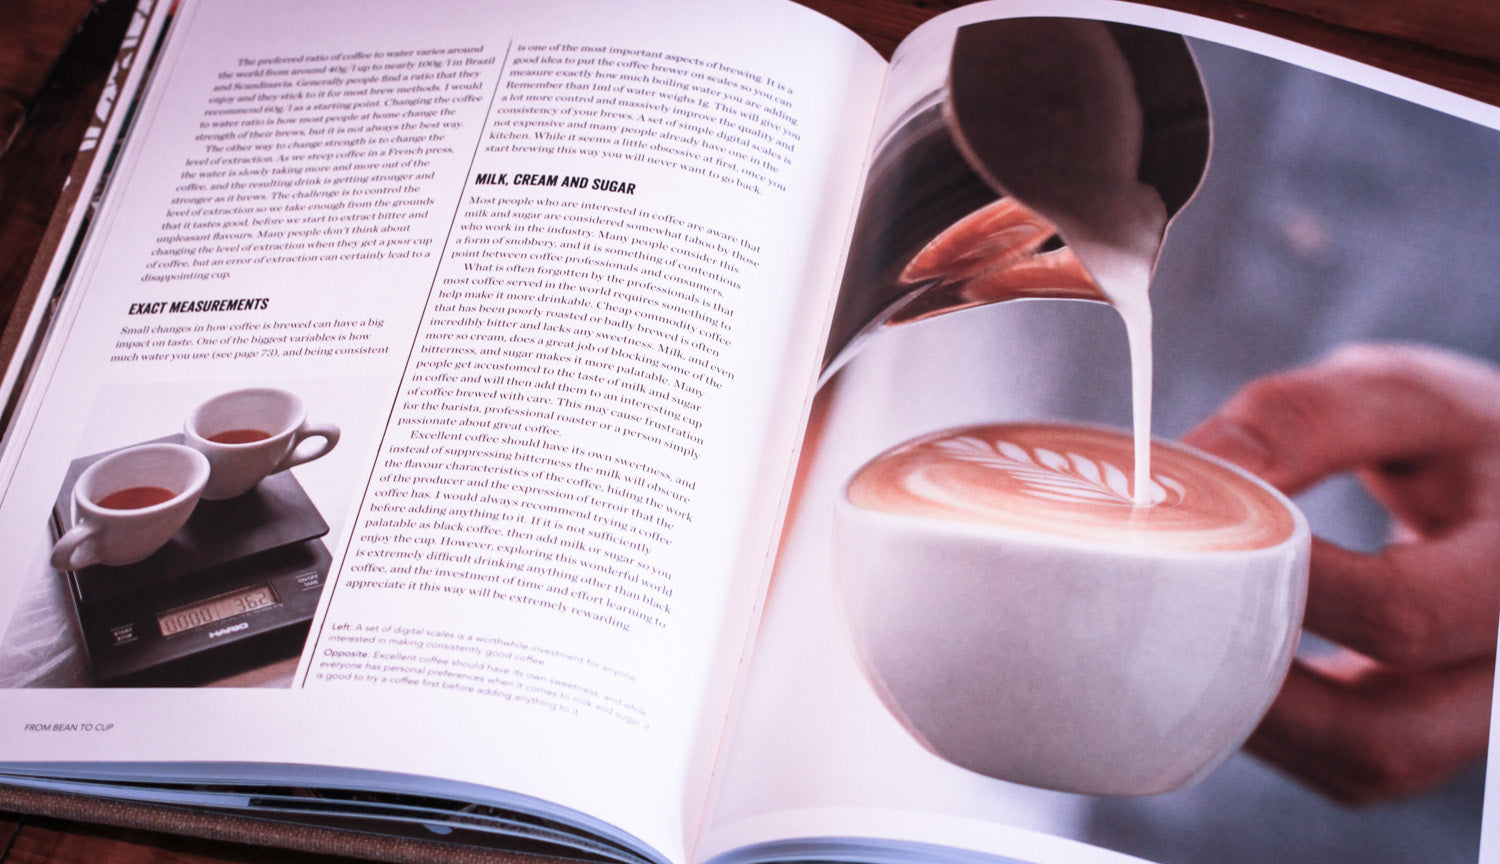 Craft Coffee: A Manual: Brewing a Better Cup at Home